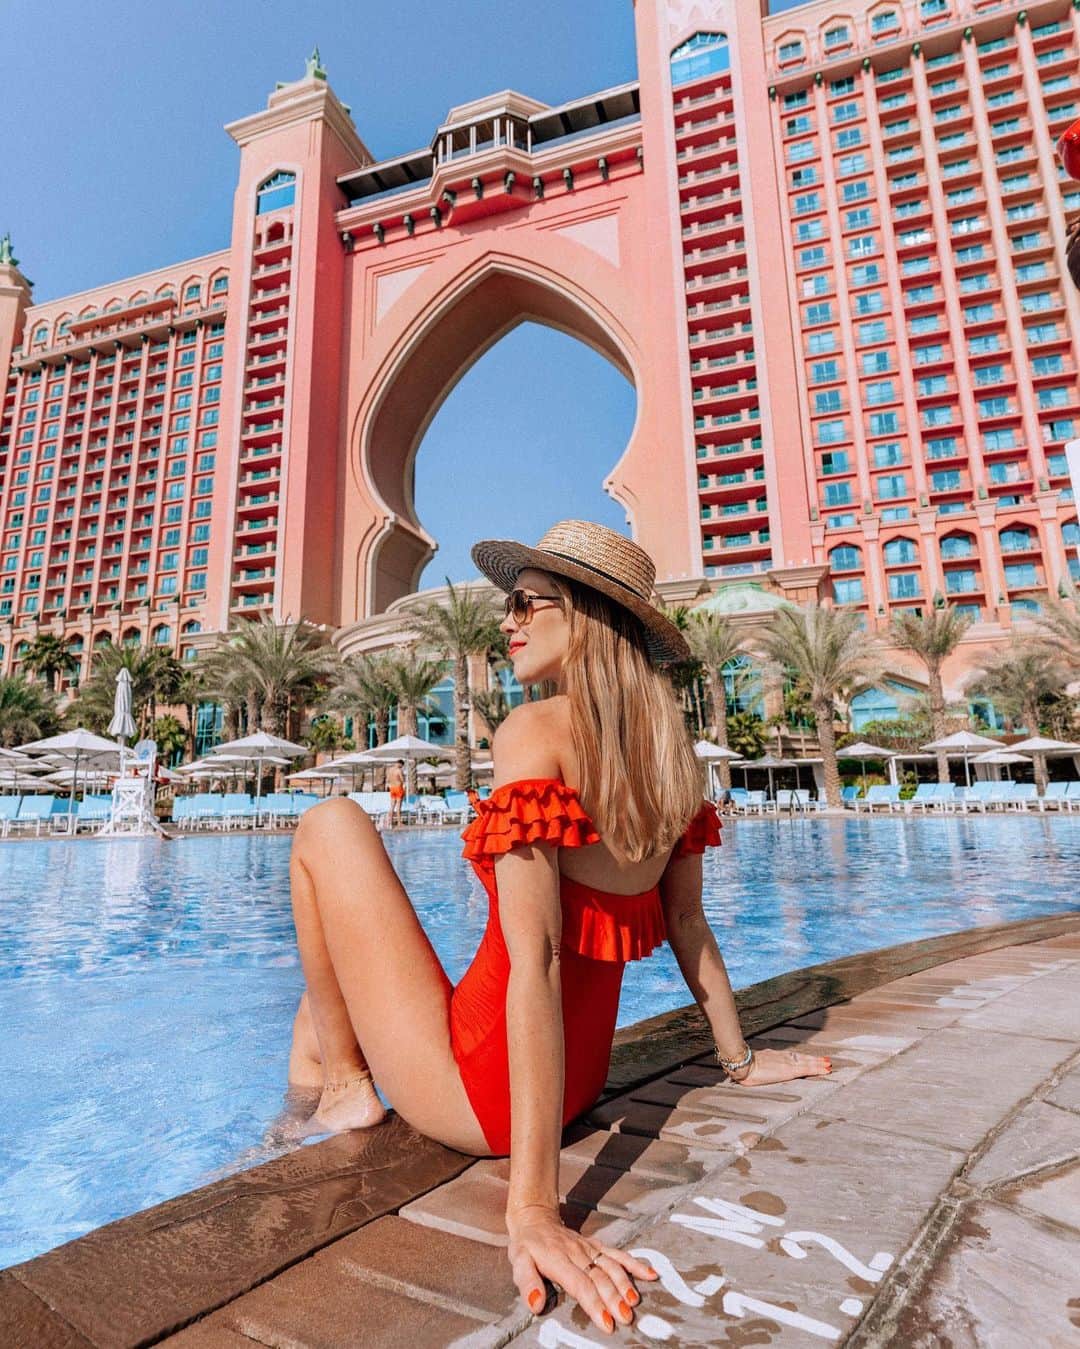 Izkizのインスタグラム：「Ad / Some snapshots from our stay at @atlantisthepalm 💙   1. Chilling at the main pool, how iconic is their pink building?  2. The view from our room 😍 3. Early mornings in the Lost Chambers aquarium 4. Mexican lunch at The Shore pool restaurant 😋  5. Breakfast with a view on our balcony  6. Slides with a view at Aquaventure waterpark  7. Never miss a sunset 🌤️  #dubai #travel #uae」